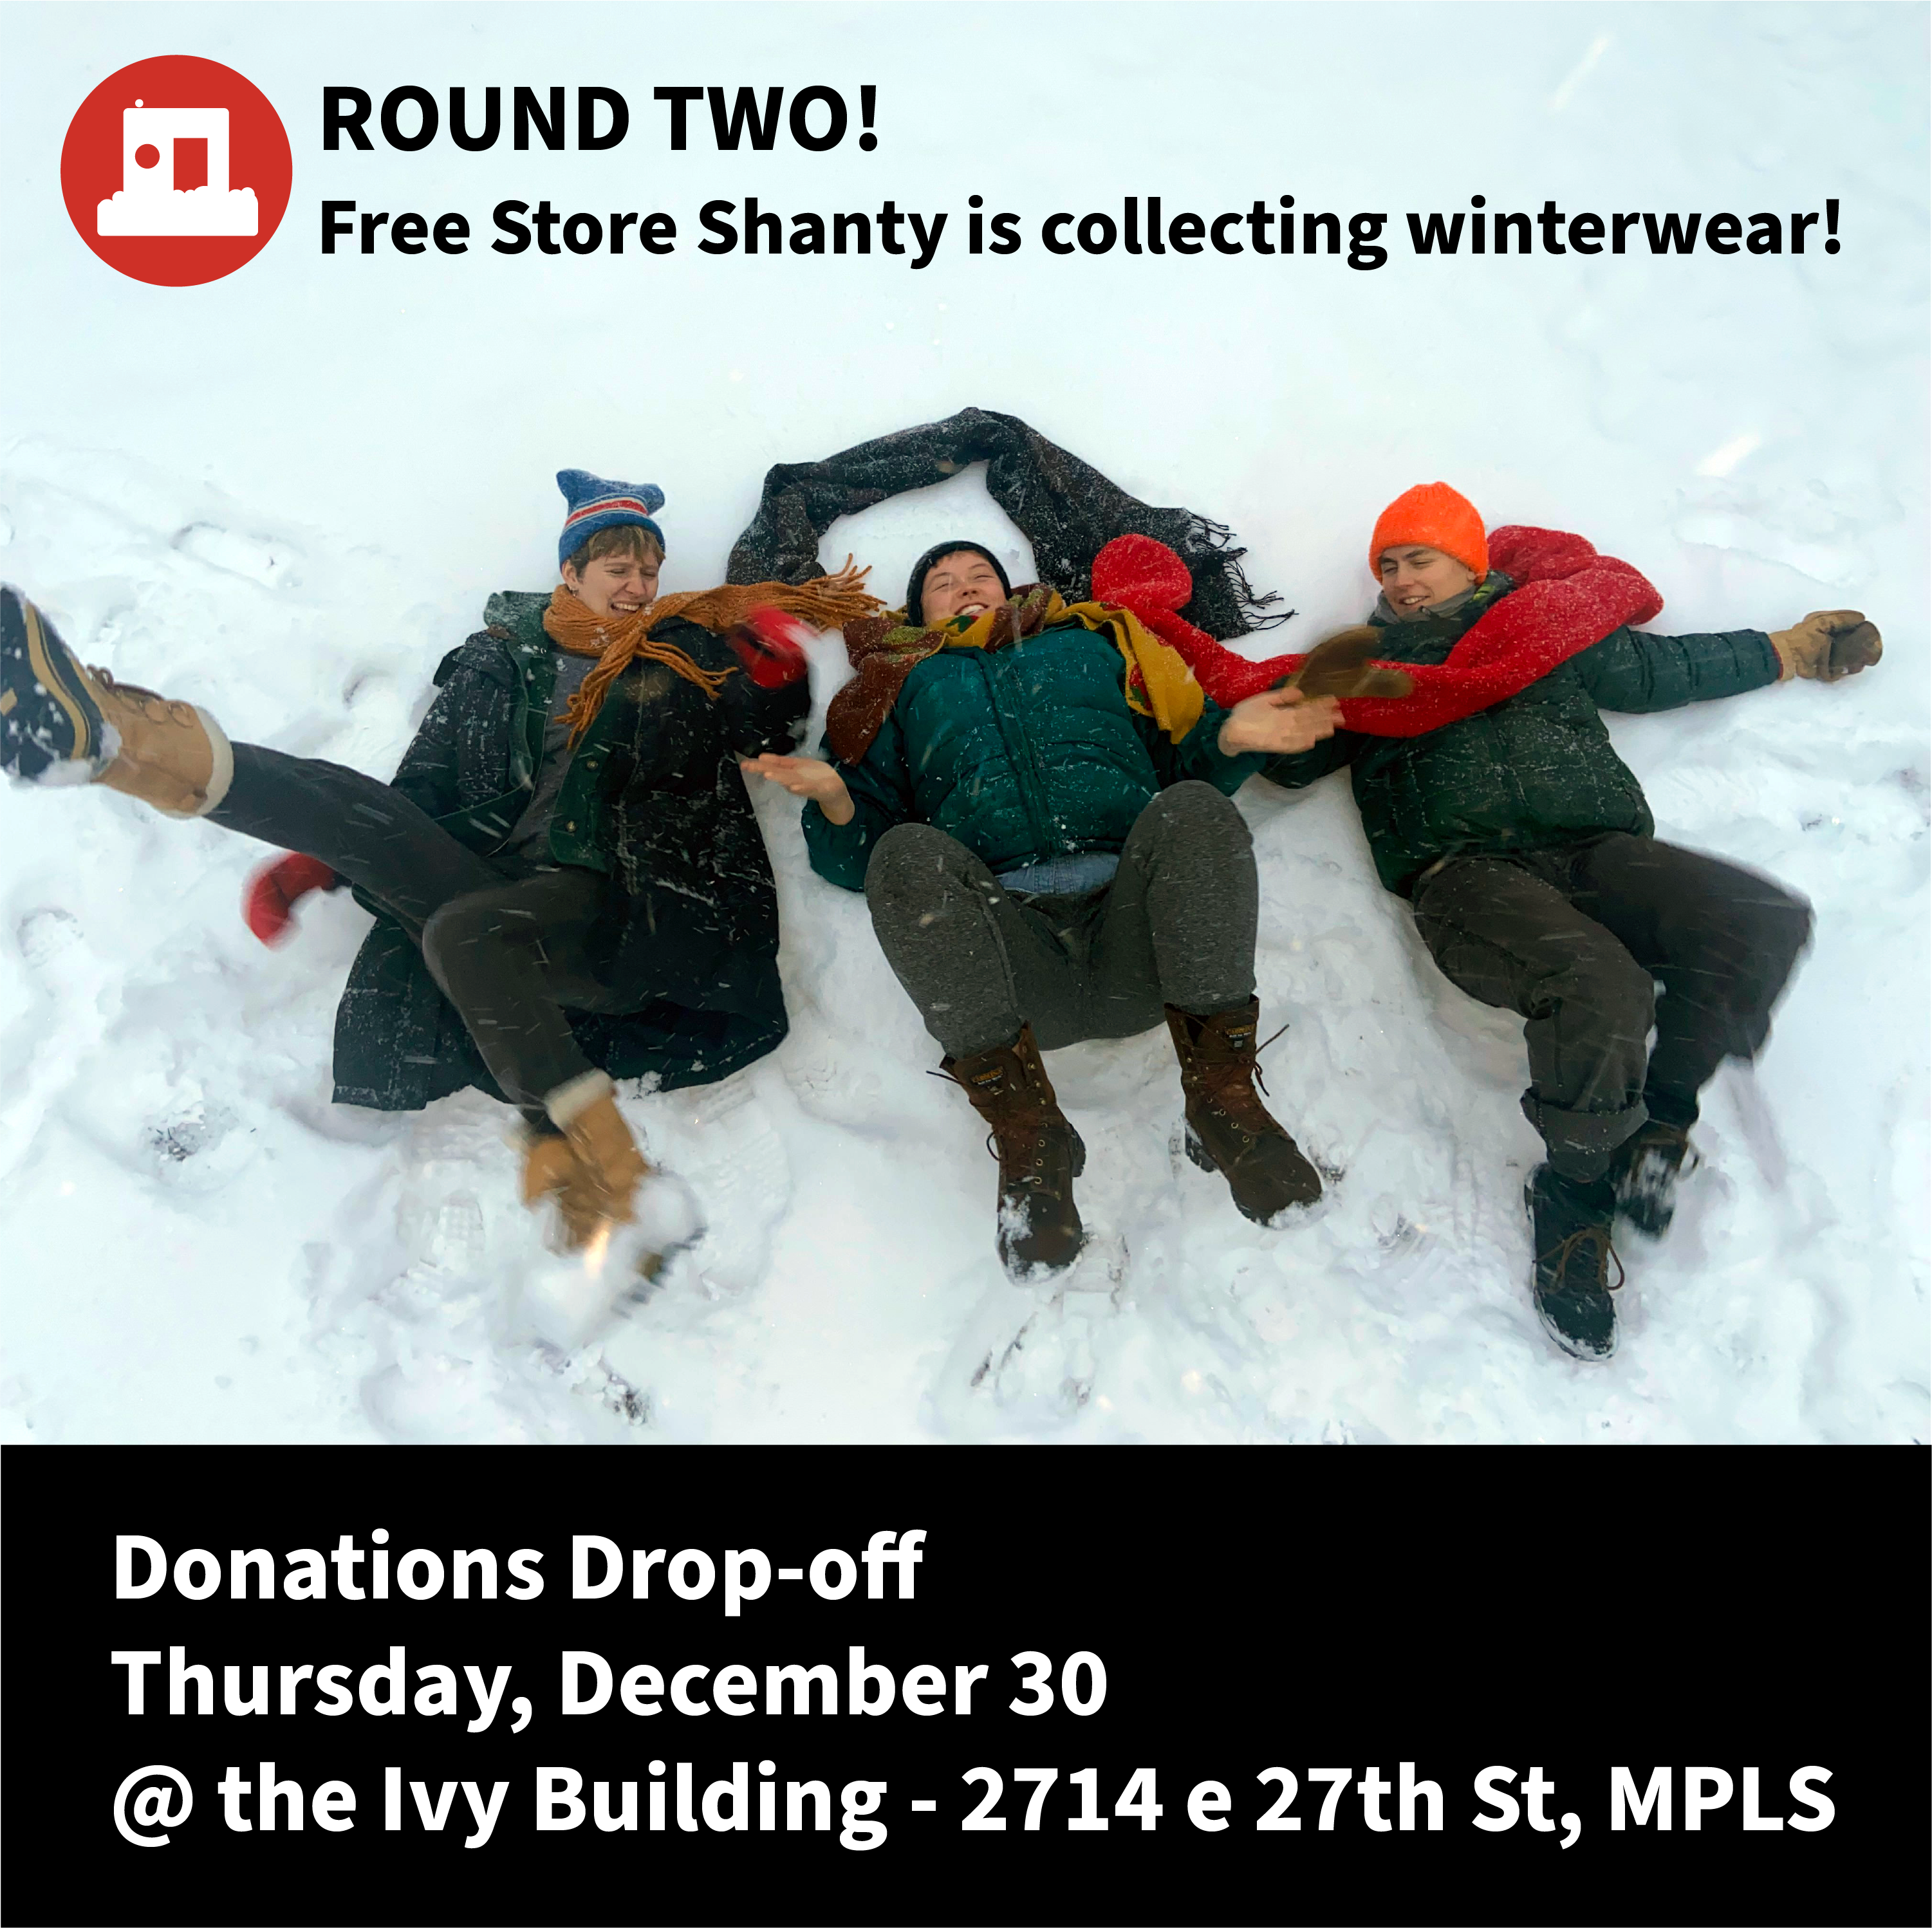 Three friends lay and play in the snow in their secondhand winter wear. Text reads: “Round Two: Free Store Shanty is collecting winterwear! Donations drop-off Thursday, December 30 @ Ivy Building, 2714 e 27th Street, Mpls”